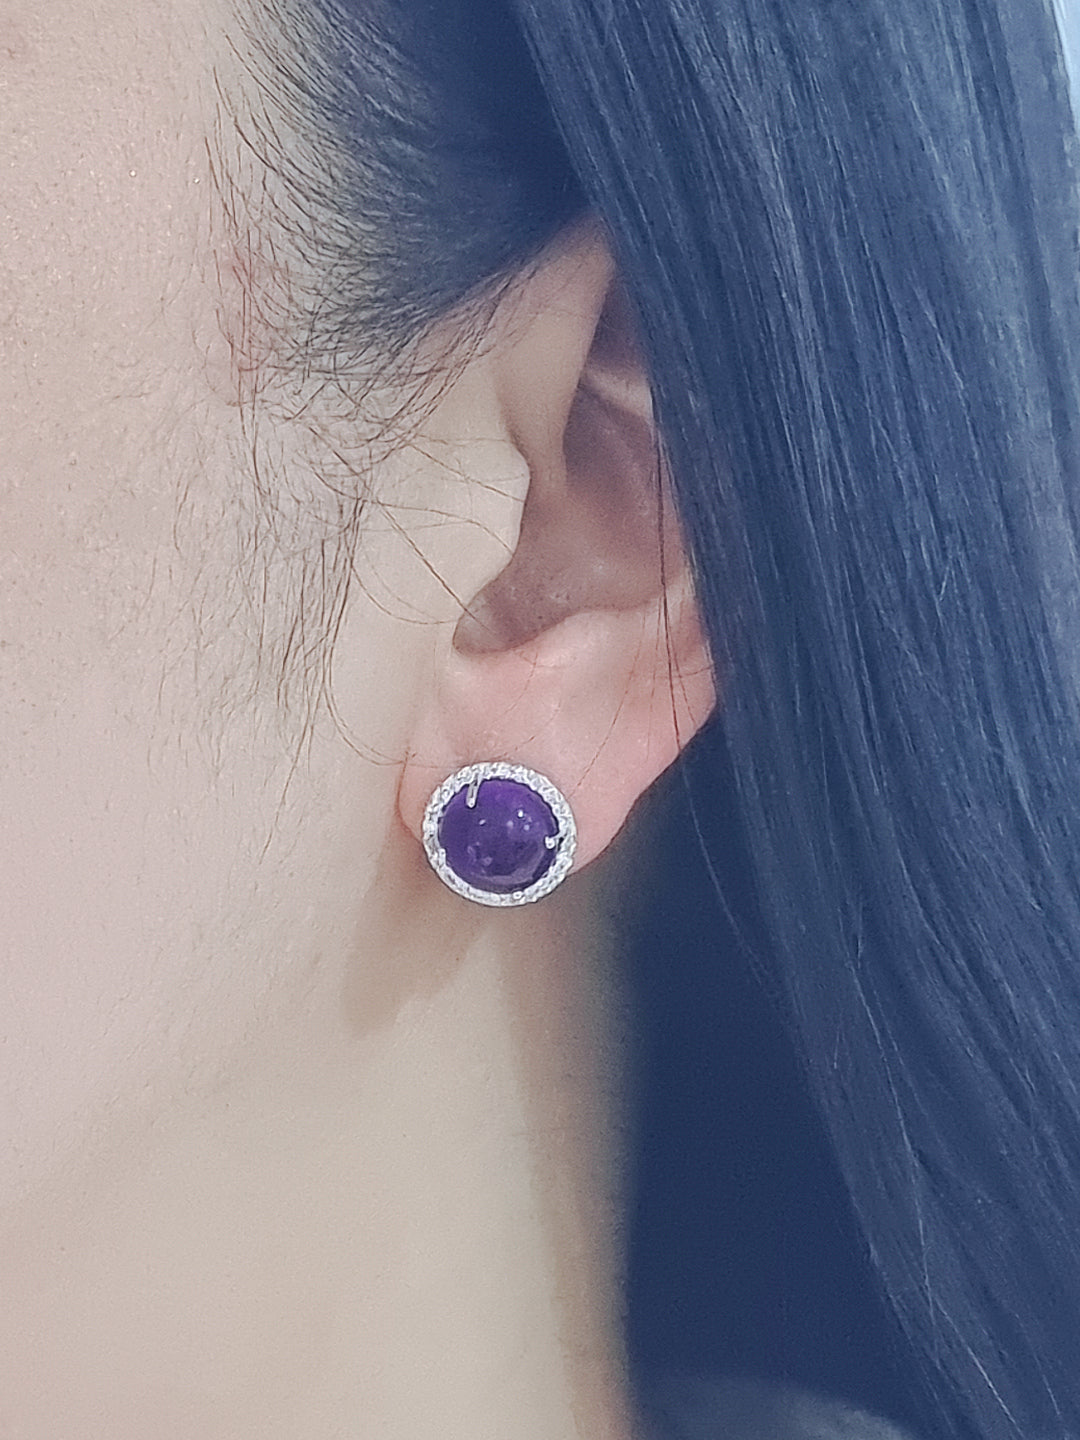 Cabochon Amethyst And Diamond Halo Stud Earrings In 18k White Gold.